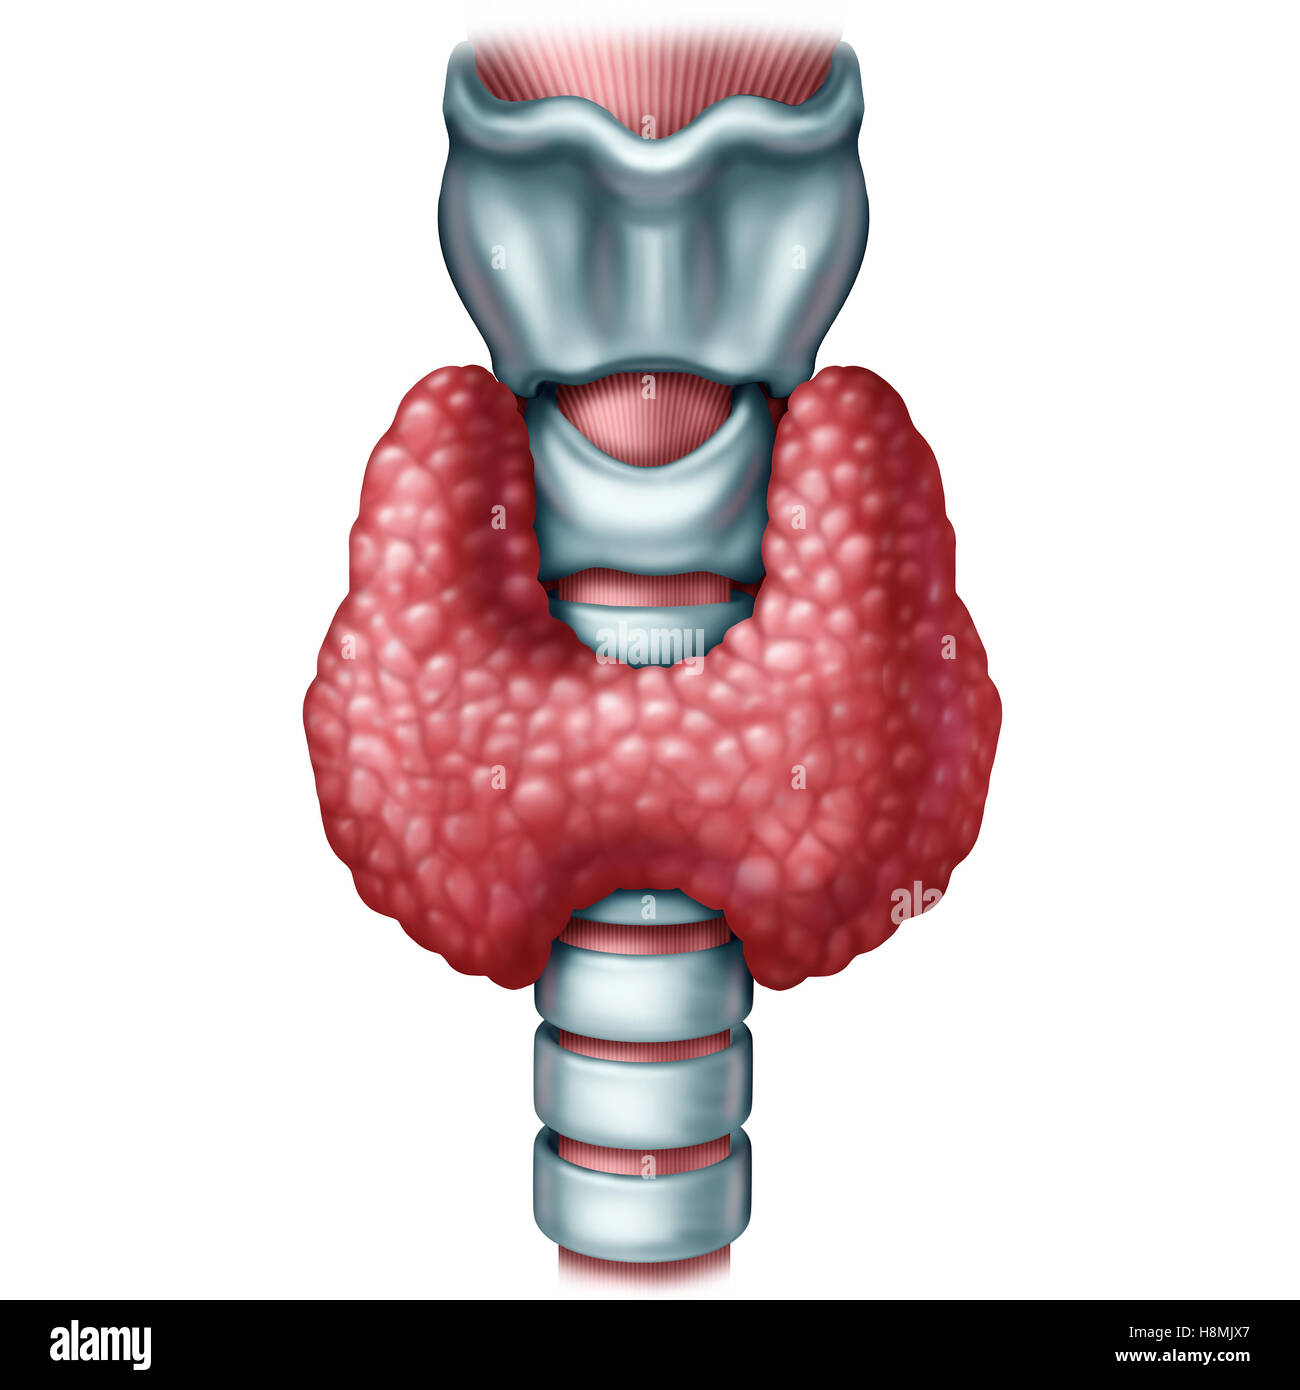 Thyroid gland medical concept as a human organ with trachea and larynx as a symbol for endocrinology system or hormone secretion with 3D illustration elements on a white background. Stock Photo